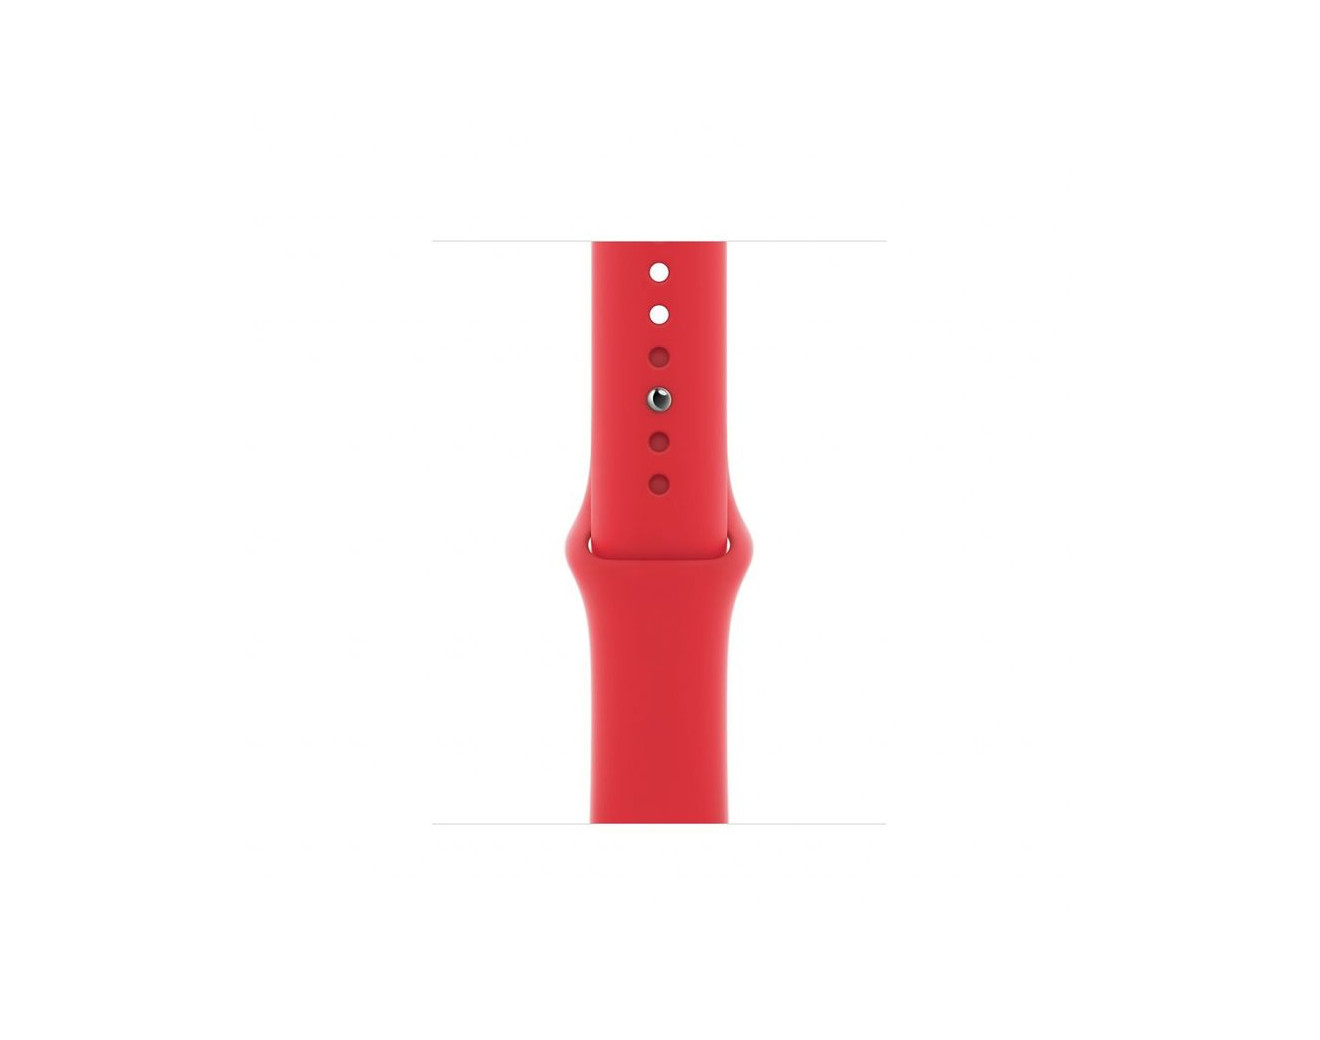 Каишка за Apple Watch 38mm - 40mm Sport Band, (PRODUCT)RED